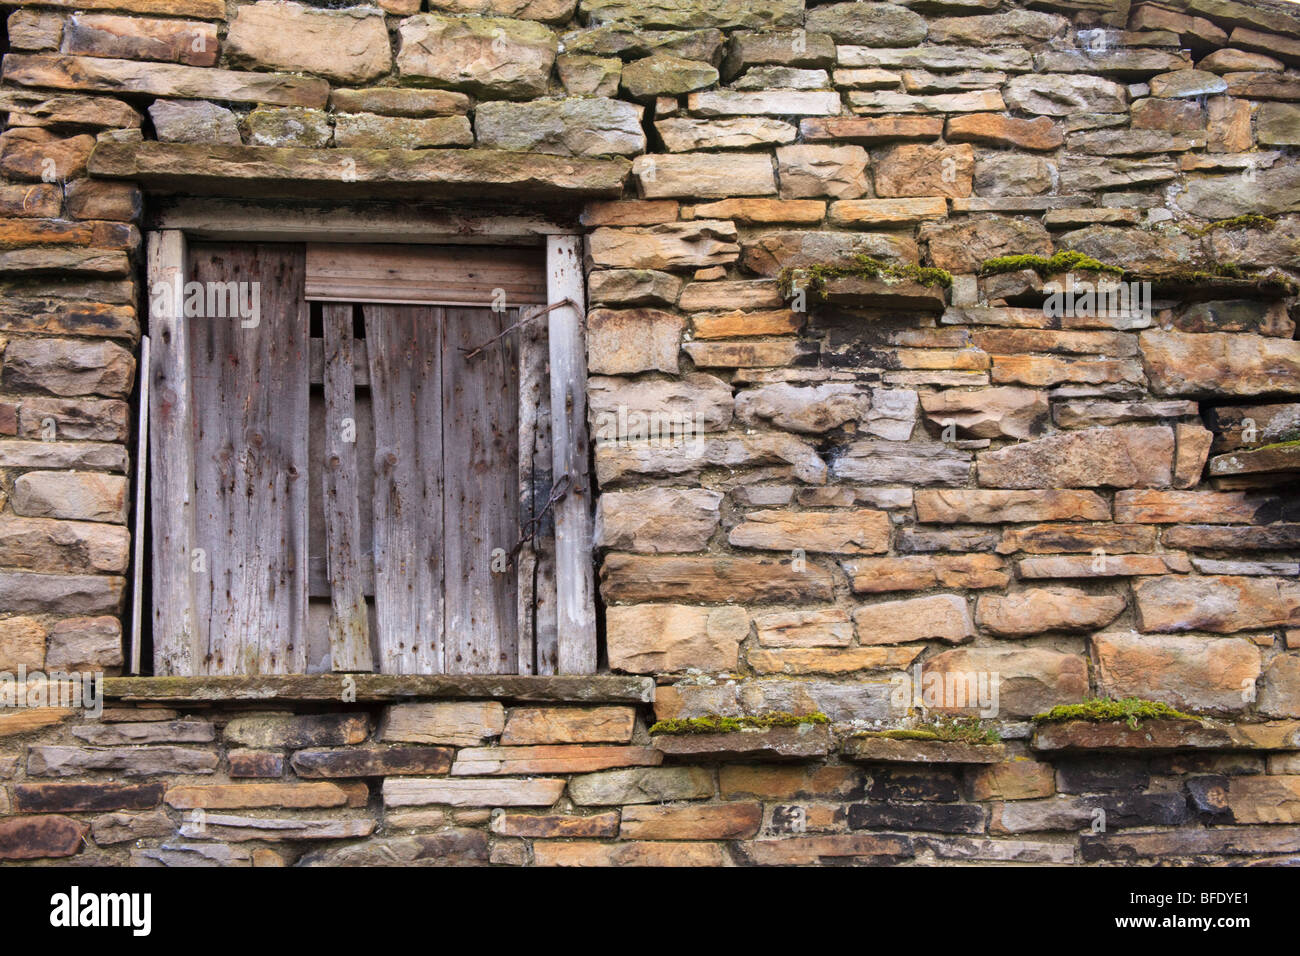 Window in the side of a stone wall of a typical barn in Thwaite Swaledale Yorkshire dales Stock Photo